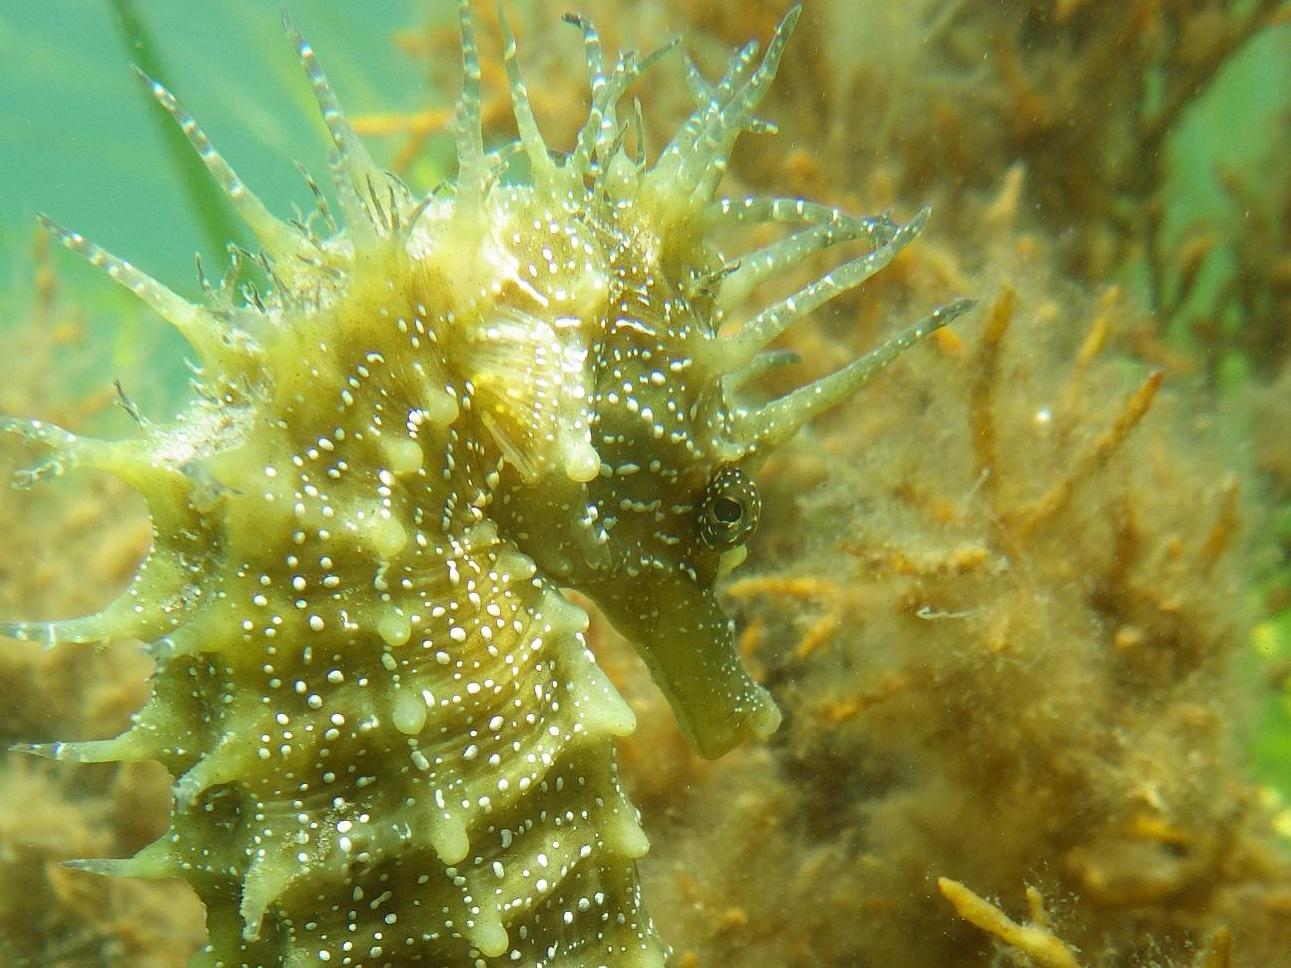 Spiny seahorses, which haven't been seen in Studland Bay for at least two years, have been recolonising their seagrass habitat in the area